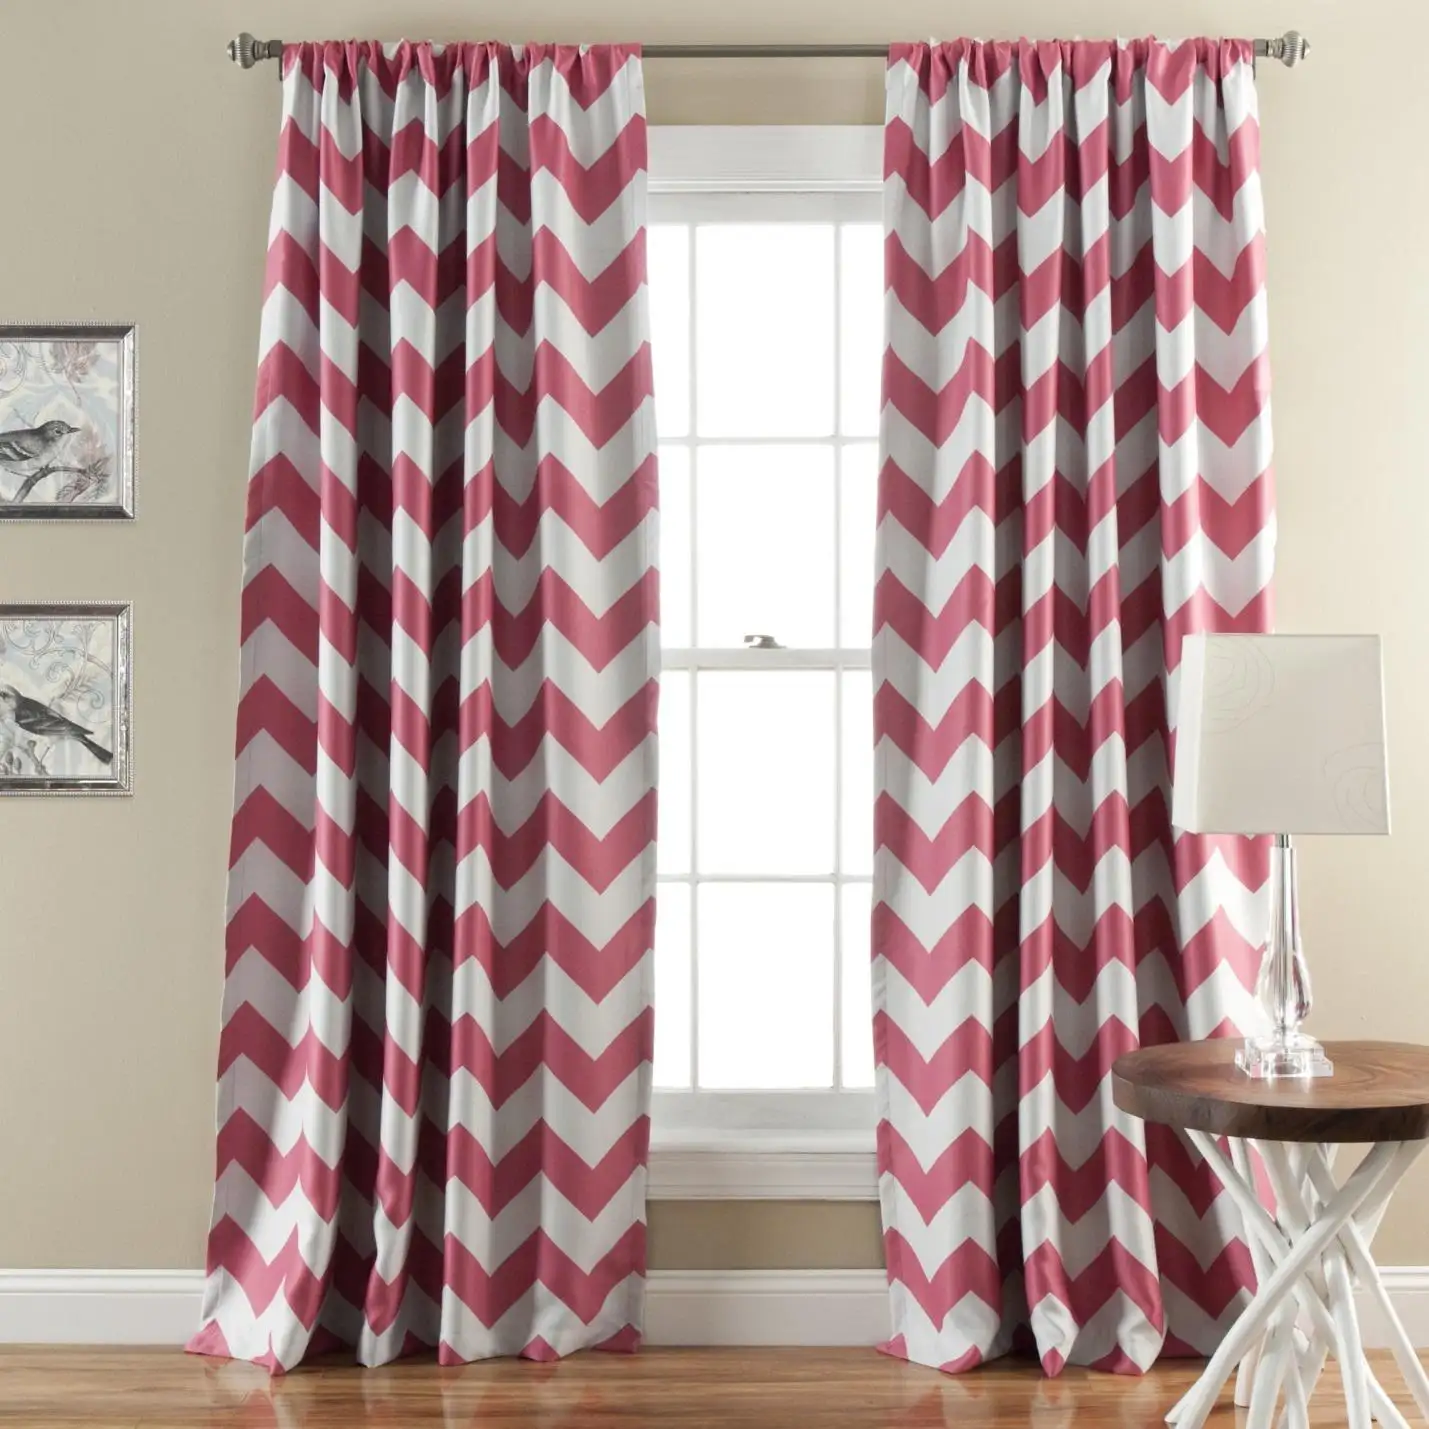 Patterned blackout curtains